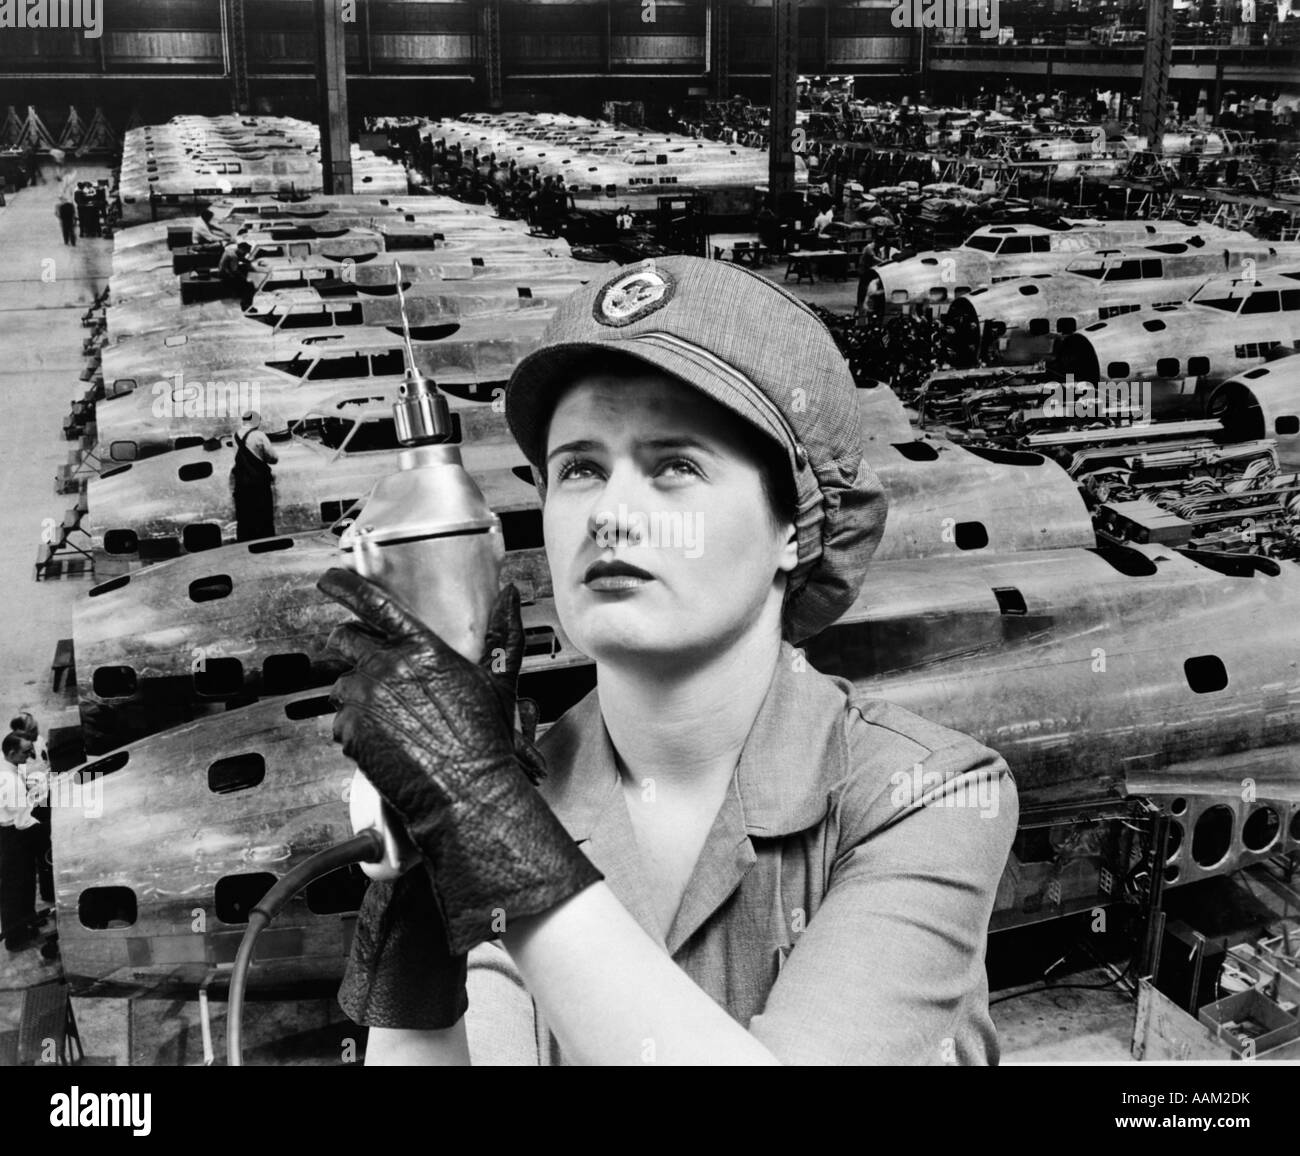 WOMAN ROSIE THE RIVETER SUPERIMPOSED OVER AIRPLANES IN FACTORY 1940s WARTIME WWII WORKER WORK Stock Photo